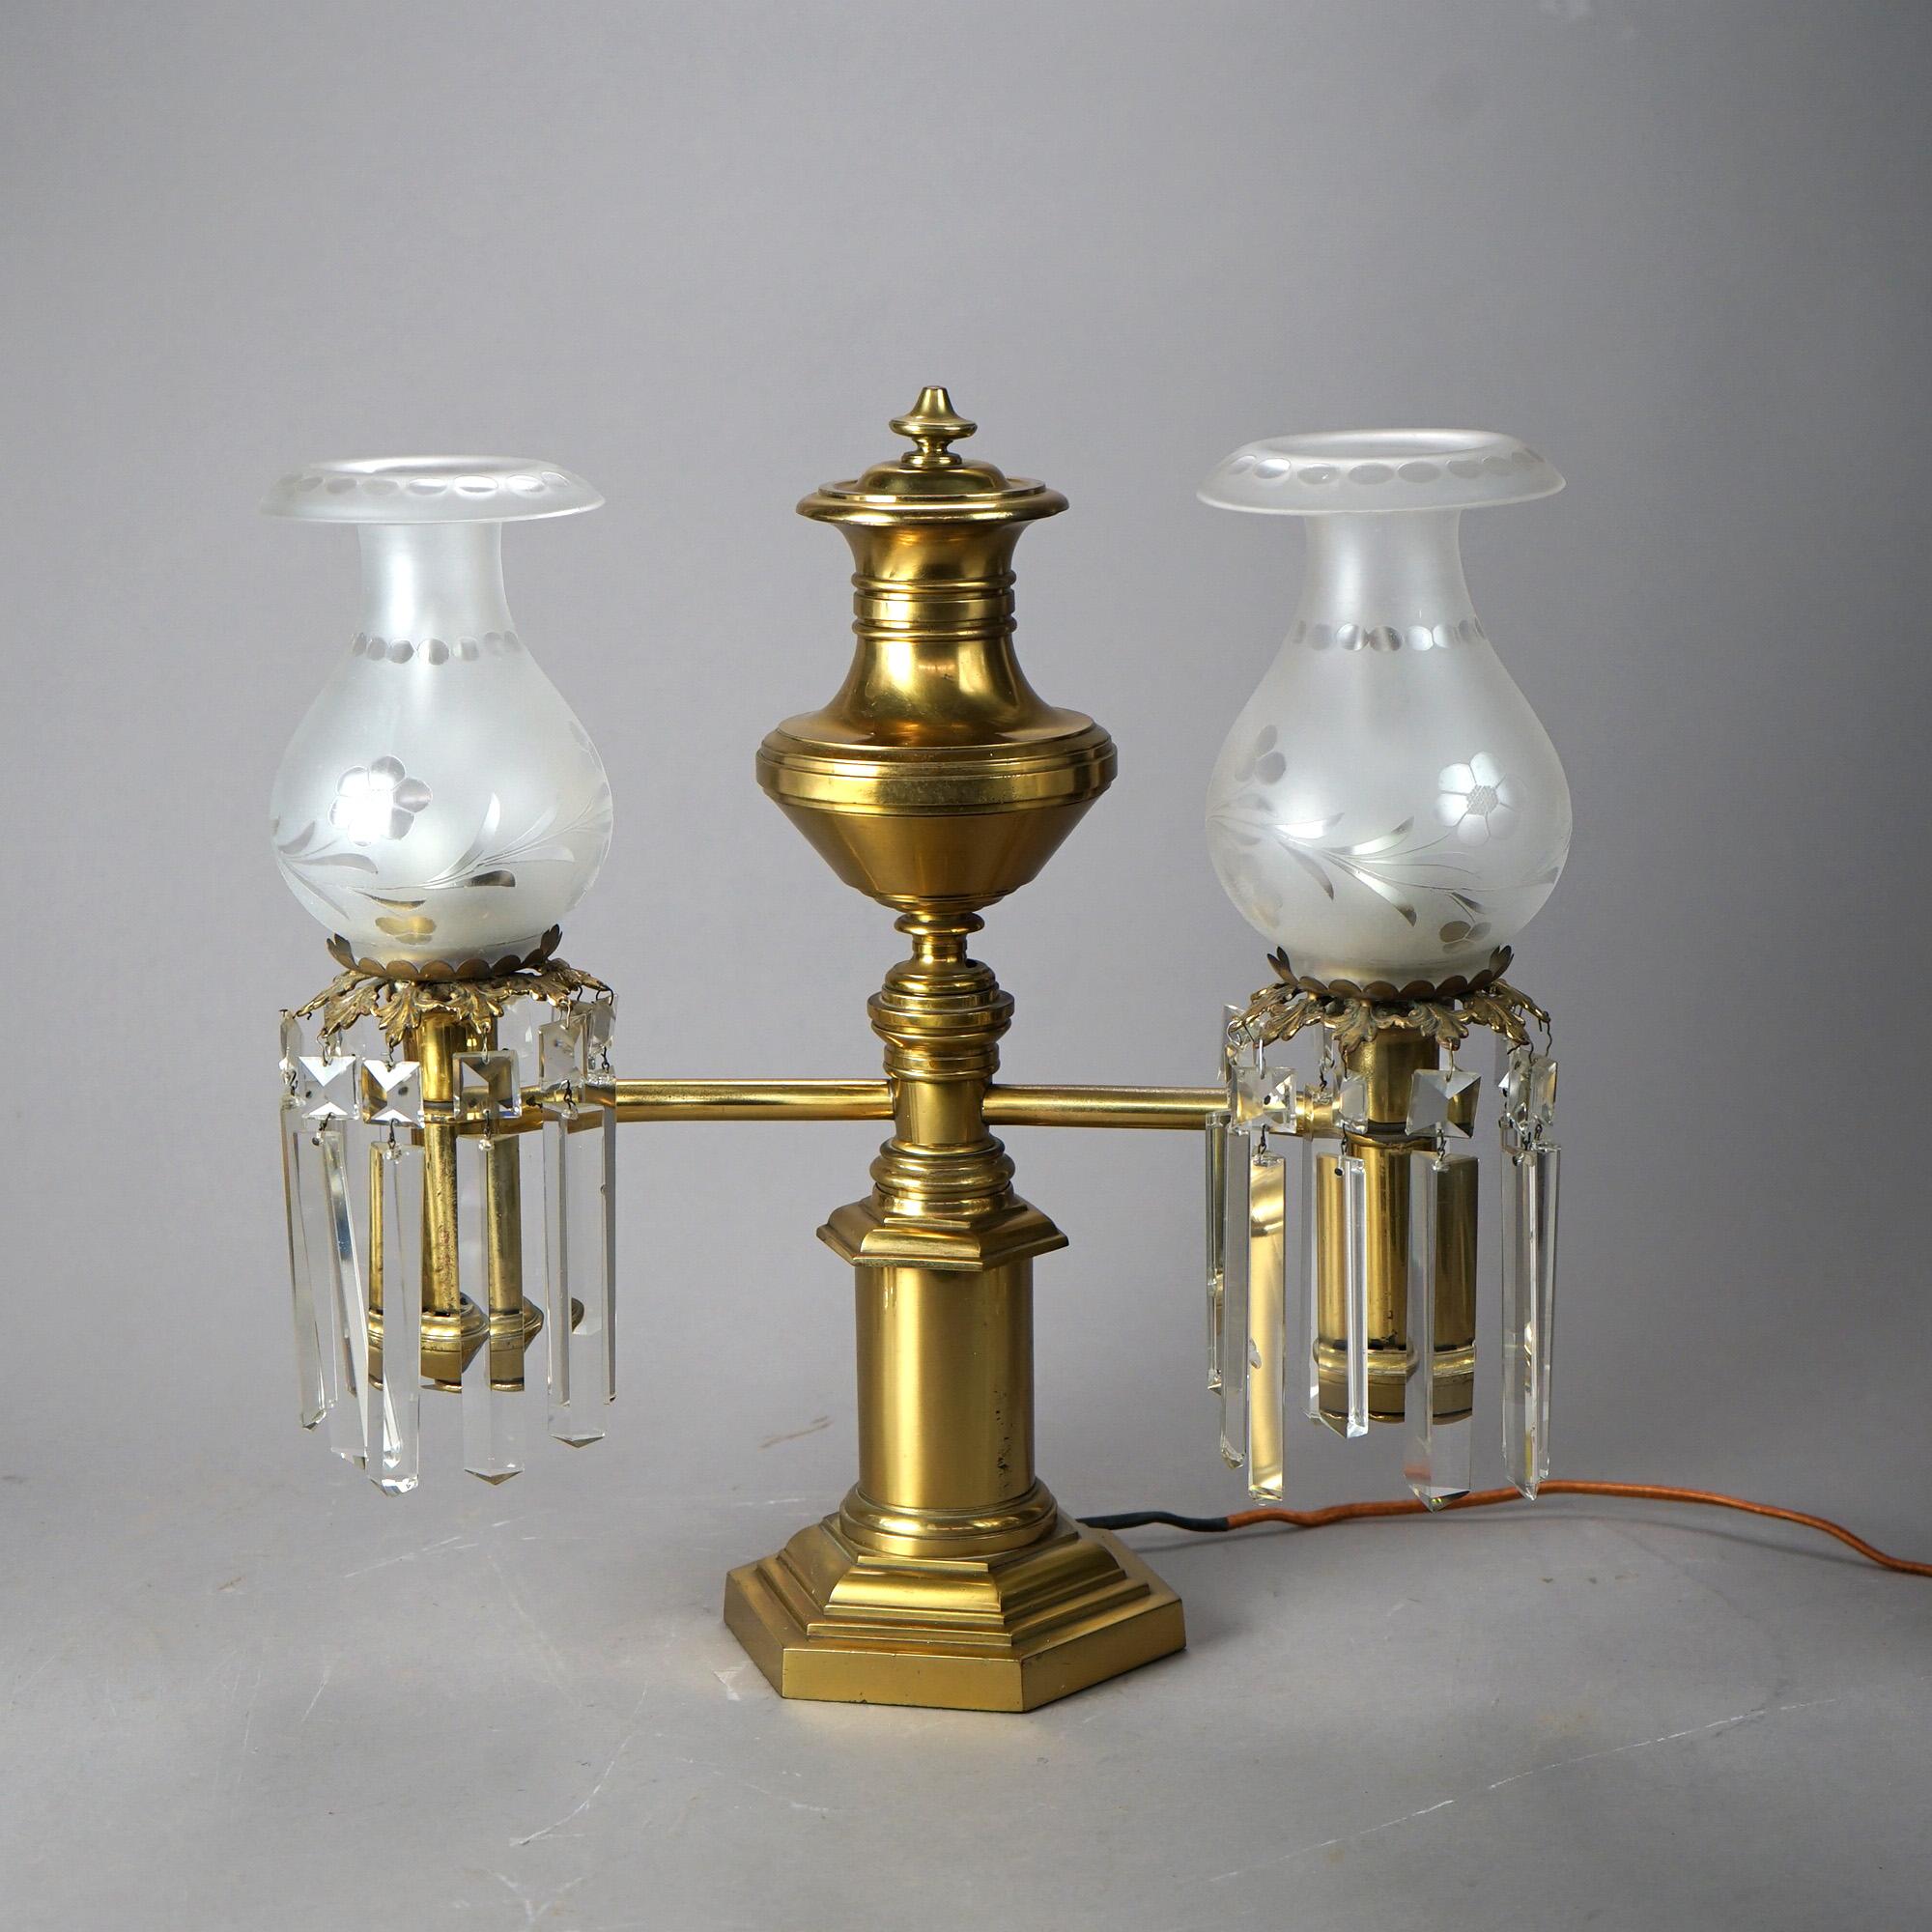 An antique Argand table lamp offers brass and bronze construction with urn form font over double arms terminating in lights having floral etched frosted shades and crystal prisms, raised on plinth with hexagonal base; electrified; 19th